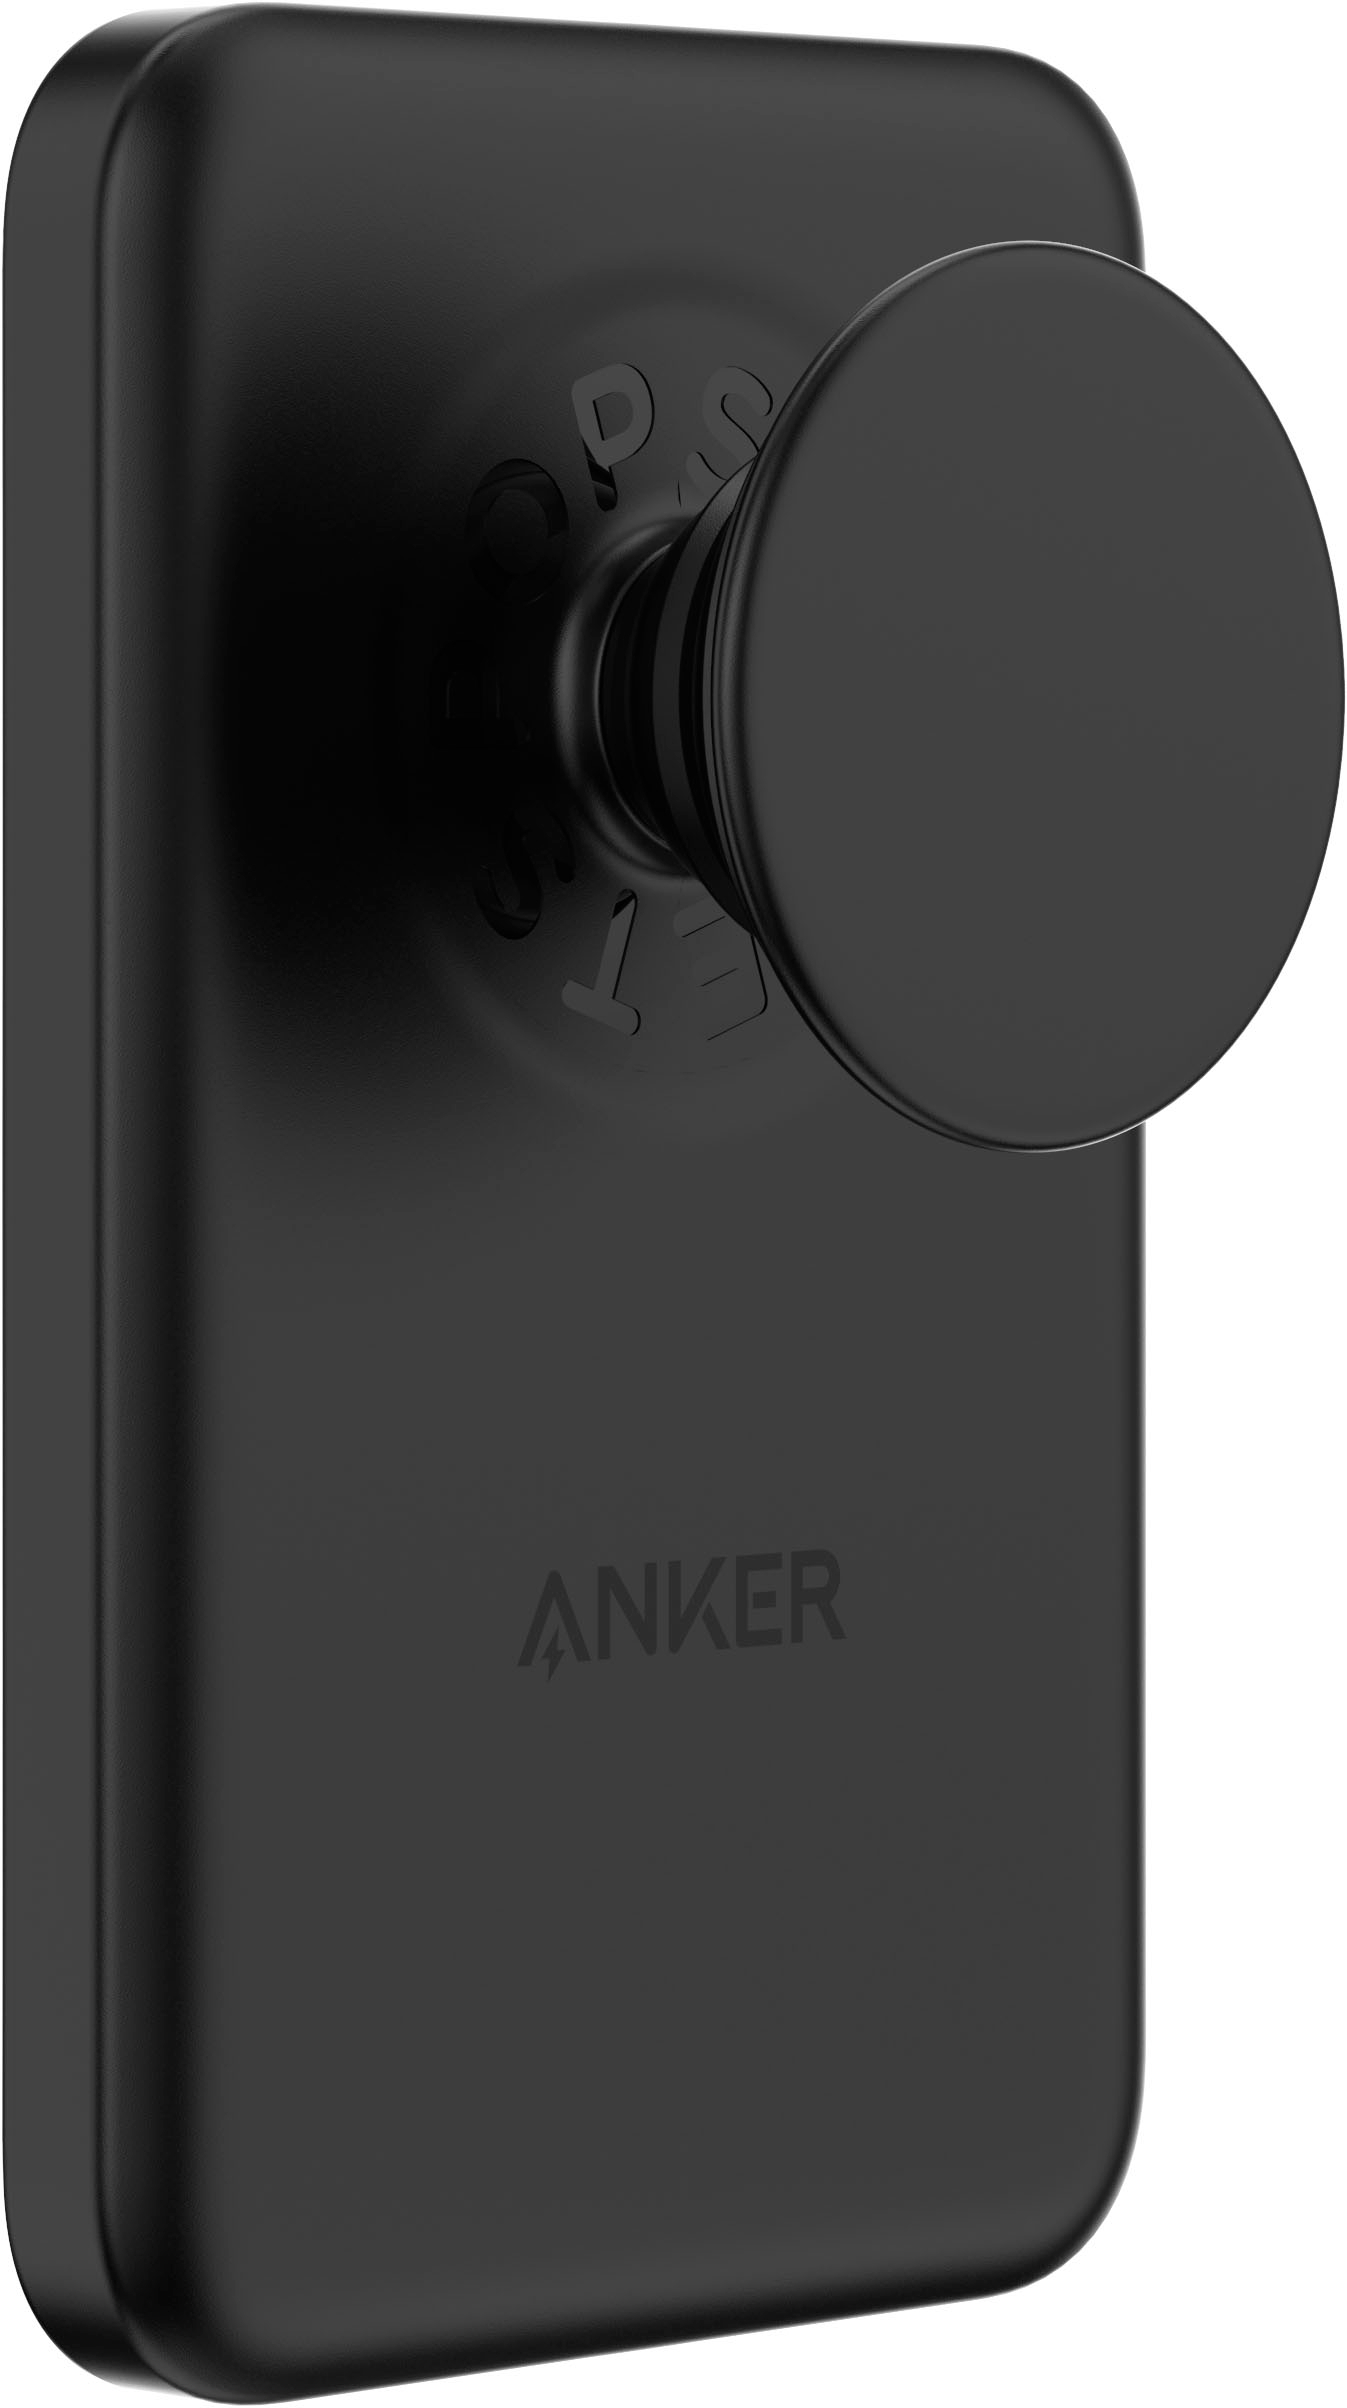 PopSockets 5000mAh Anker MagGo Magnetic Battery Charger with Grip for MagSafe - Black